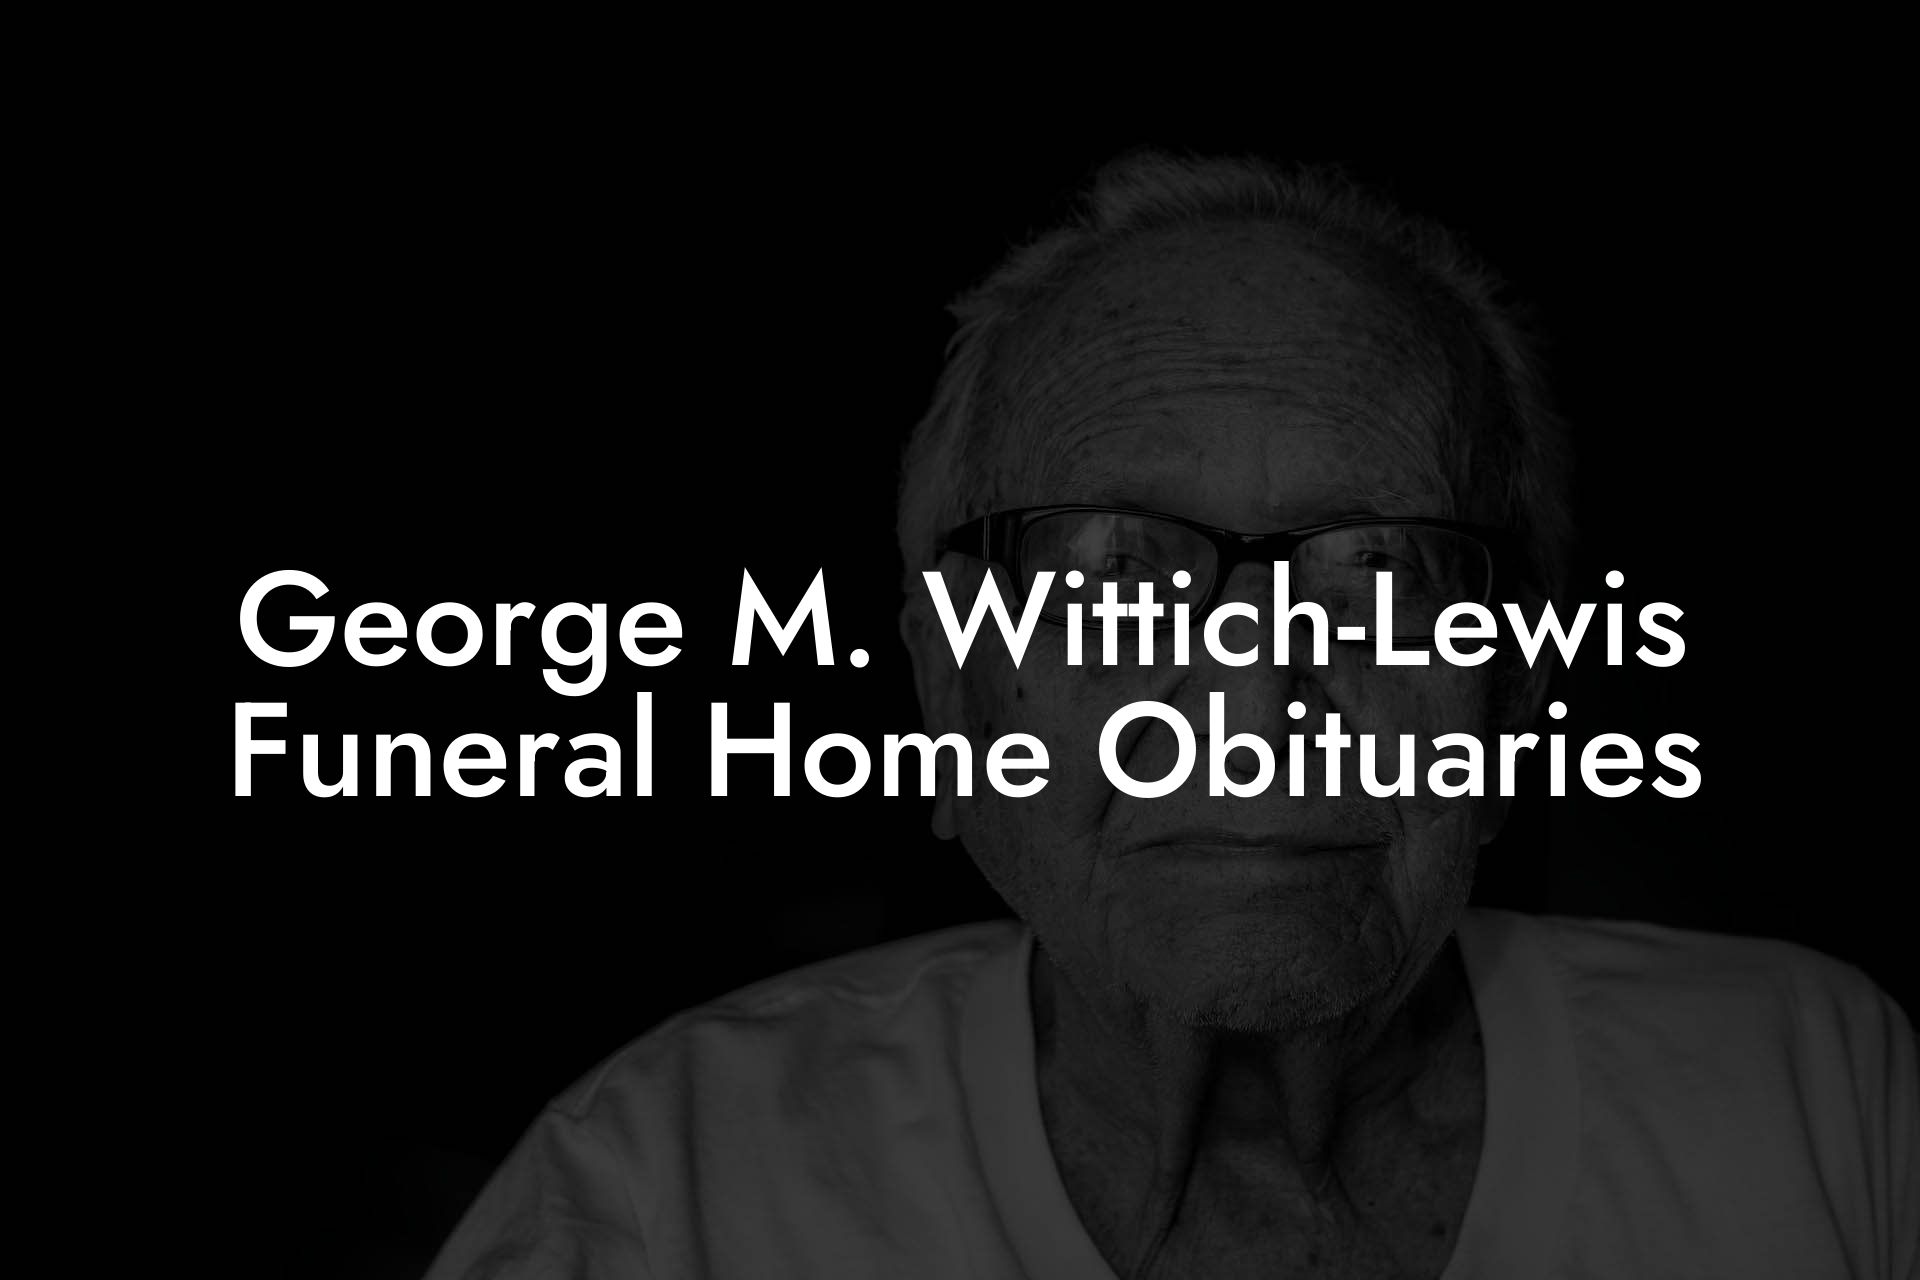 George M. Wittich-Lewis Funeral Home Obituaries